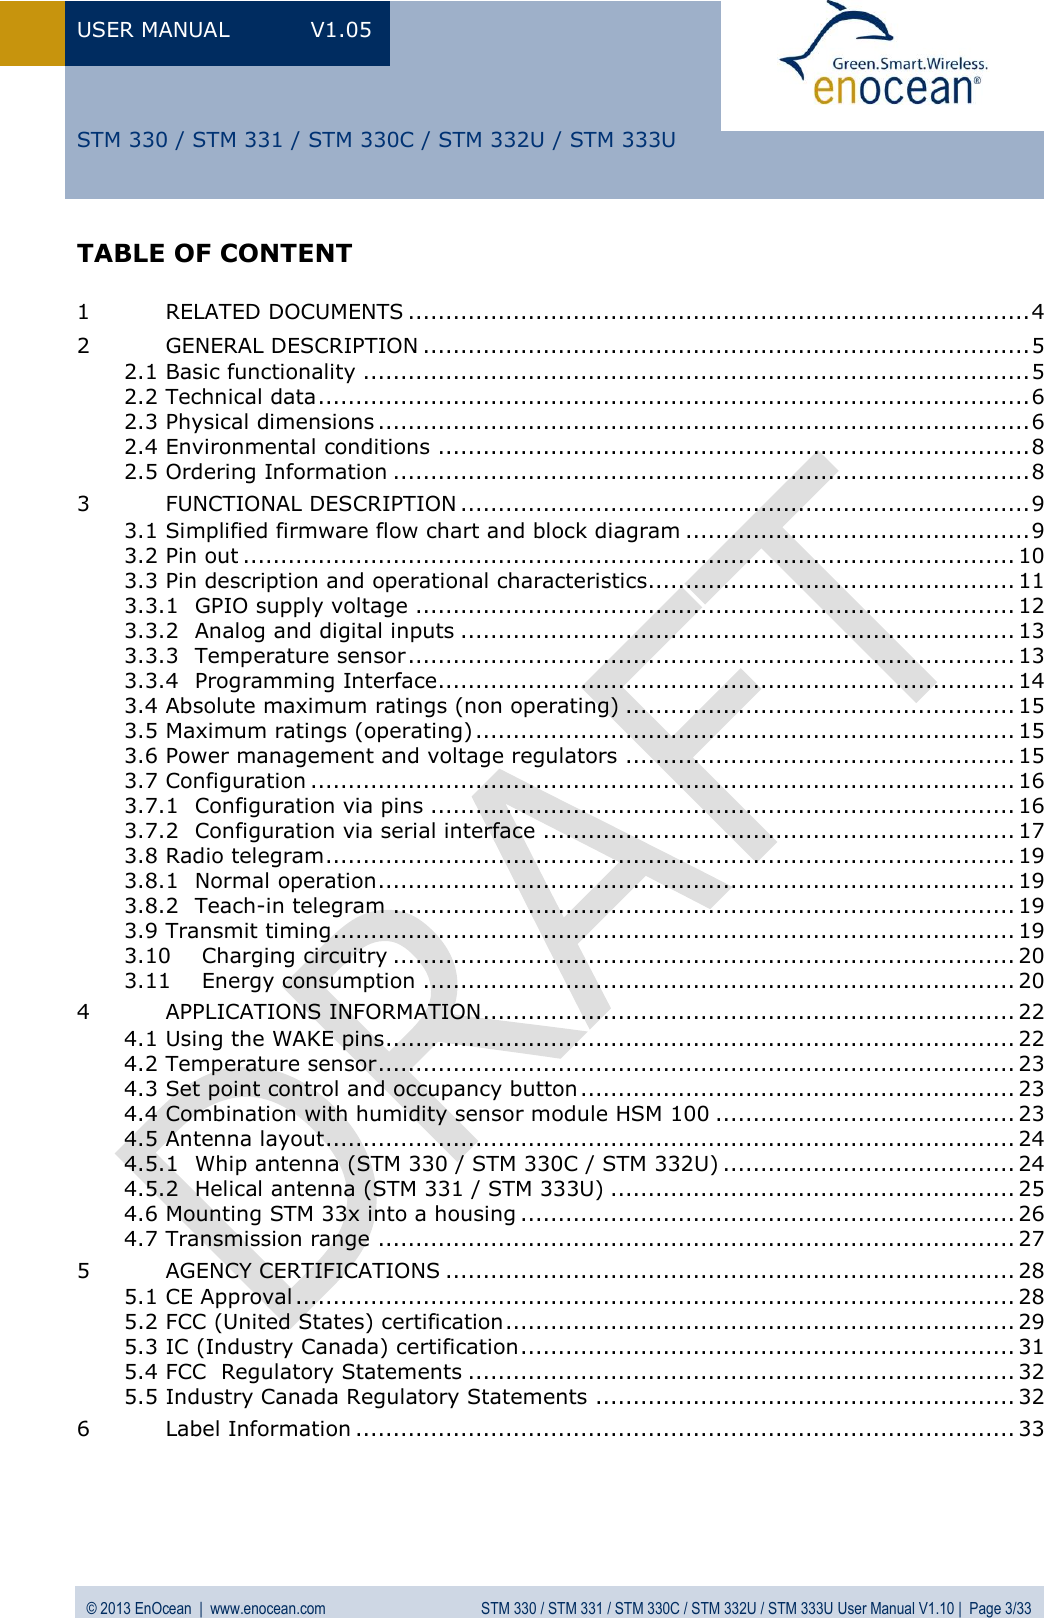 USER MANUAL  V1.05  © 2013 EnOcean  |  www.enocean.com  STM 330 / STM 331 / STM 330C / STM 332U / STM 333U User Manual V1.10 |  Page 3/33   STM 330 / STM 331 / STM 330C / STM 332U / STM 333U TABLE OF CONTENT  1 RELATED DOCUMENTS ................................................................................... 4 2 GENERAL DESCRIPTION ................................................................................. 5 2.1 Basic functionality ......................................................................................... 5 2.2 Technical data ............................................................................................... 6 2.3 Physical dimensions ....................................................................................... 6 2.4 Environmental conditions ............................................................................... 8 2.5 Ordering Information ..................................................................................... 8 3 FUNCTIONAL DESCRIPTION ............................................................................ 9 3.1 Simplified firmware flow chart and block diagram .............................................. 9 3.2 Pin out ....................................................................................................... 10 3.3 Pin description and operational characteristics ................................................. 11 3.3.1 GPIO supply voltage ................................................................................ 12 3.3.2 Analog and digital inputs .......................................................................... 13 3.3.3 Temperature sensor ................................................................................. 13 3.3.4 Programming Interface............................................................................. 14 3.4 Absolute maximum ratings (non operating) .................................................... 15 3.5 Maximum ratings (operating) ........................................................................ 15 3.6 Power management and voltage regulators .................................................... 15 3.7 Configuration .............................................................................................. 16 3.7.1 Configuration via pins .............................................................................. 16 3.7.2 Configuration via serial interface ............................................................... 17 3.8 Radio telegram ............................................................................................ 19 3.8.1 Normal operation ..................................................................................... 19 3.8.2 Teach-in telegram ................................................................................... 19 3.9 Transmit timing ........................................................................................... 19 3.10 Charging circuitry ................................................................................... 20 3.11 Energy consumption ............................................................................... 20 4 APPLICATIONS INFORMATION ....................................................................... 22 4.1 Using the WAKE pins .................................................................................... 22 4.2 Temperature sensor ..................................................................................... 23 4.3 Set point control and occupancy button .......................................................... 23 4.4 Combination with humidity sensor module HSM 100 ........................................ 23 4.5 Antenna layout ............................................................................................ 24 4.5.1 Whip antenna (STM 330 / STM 330C / STM 332U) ....................................... 24 4.5.2 Helical antenna (STM 331 / STM 333U) ...................................................... 25 4.6 Mounting STM 33x into a housing .................................................................. 26 4.7 Transmission range ..................................................................................... 27 5 AGENCY CERTIFICATIONS ............................................................................ 28 5.1 CE Approval ................................................................................................ 28 5.2 FCC (United States) certification .................................................................... 29 5.3 IC (Industry Canada) certification .................................................................. 31 5.4 FCC  Regulatory Statements ......................................................................... 32 5.5 Industry Canada Regulatory Statements ........................................................ 32 6 Label Information ........................................................................................ 33  